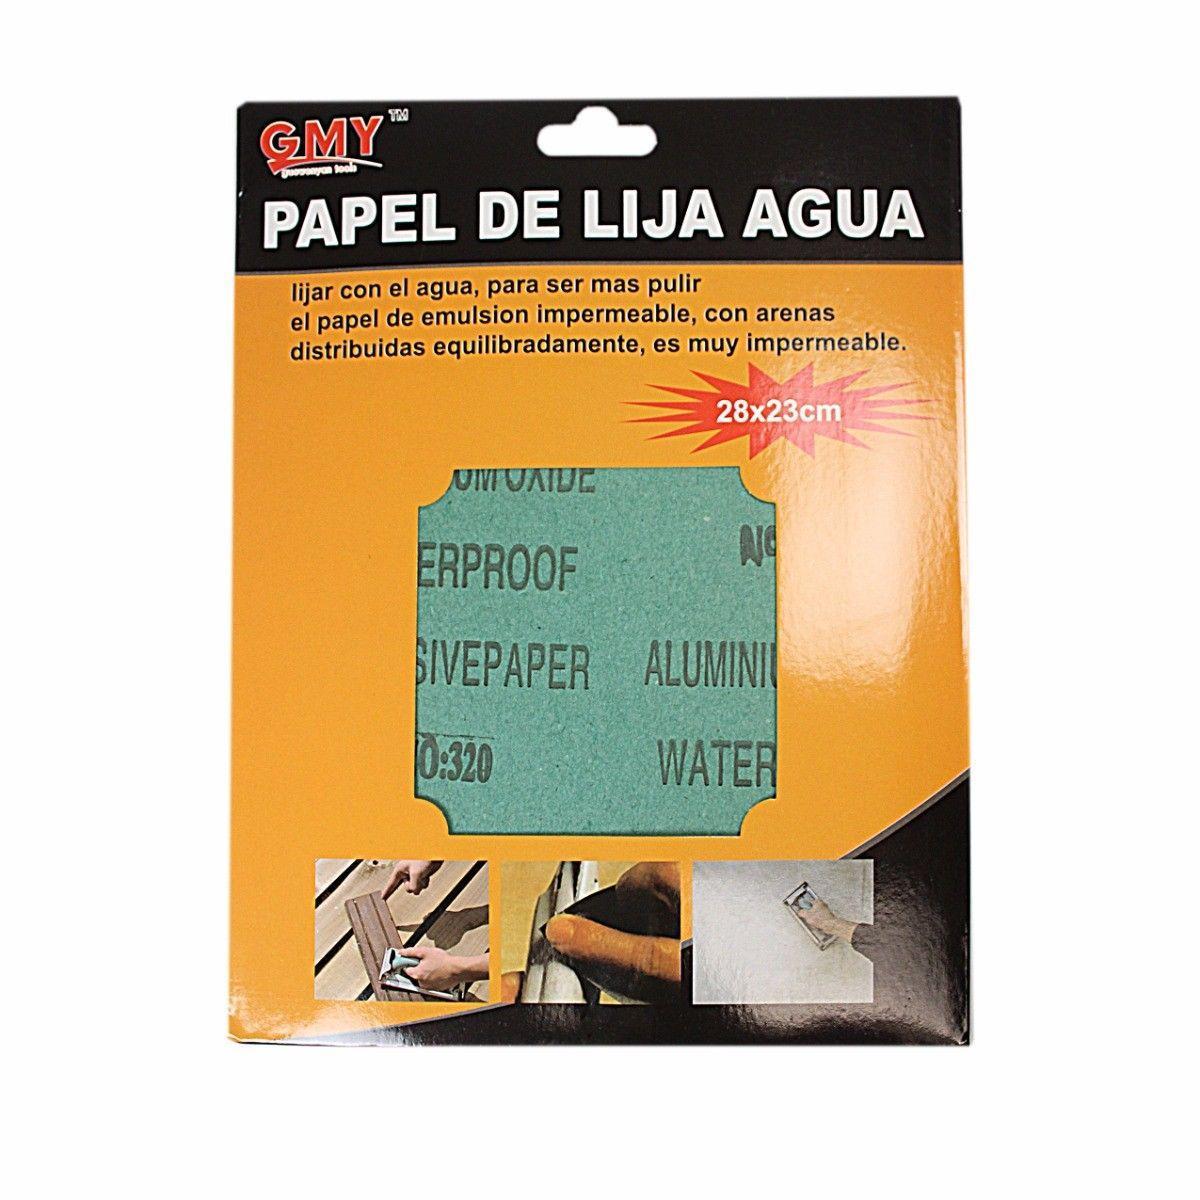 Pack Of 3 High Quality Power Sanding Sheets DIY 28cm x 23cm 4826 (Large Letter Rate)